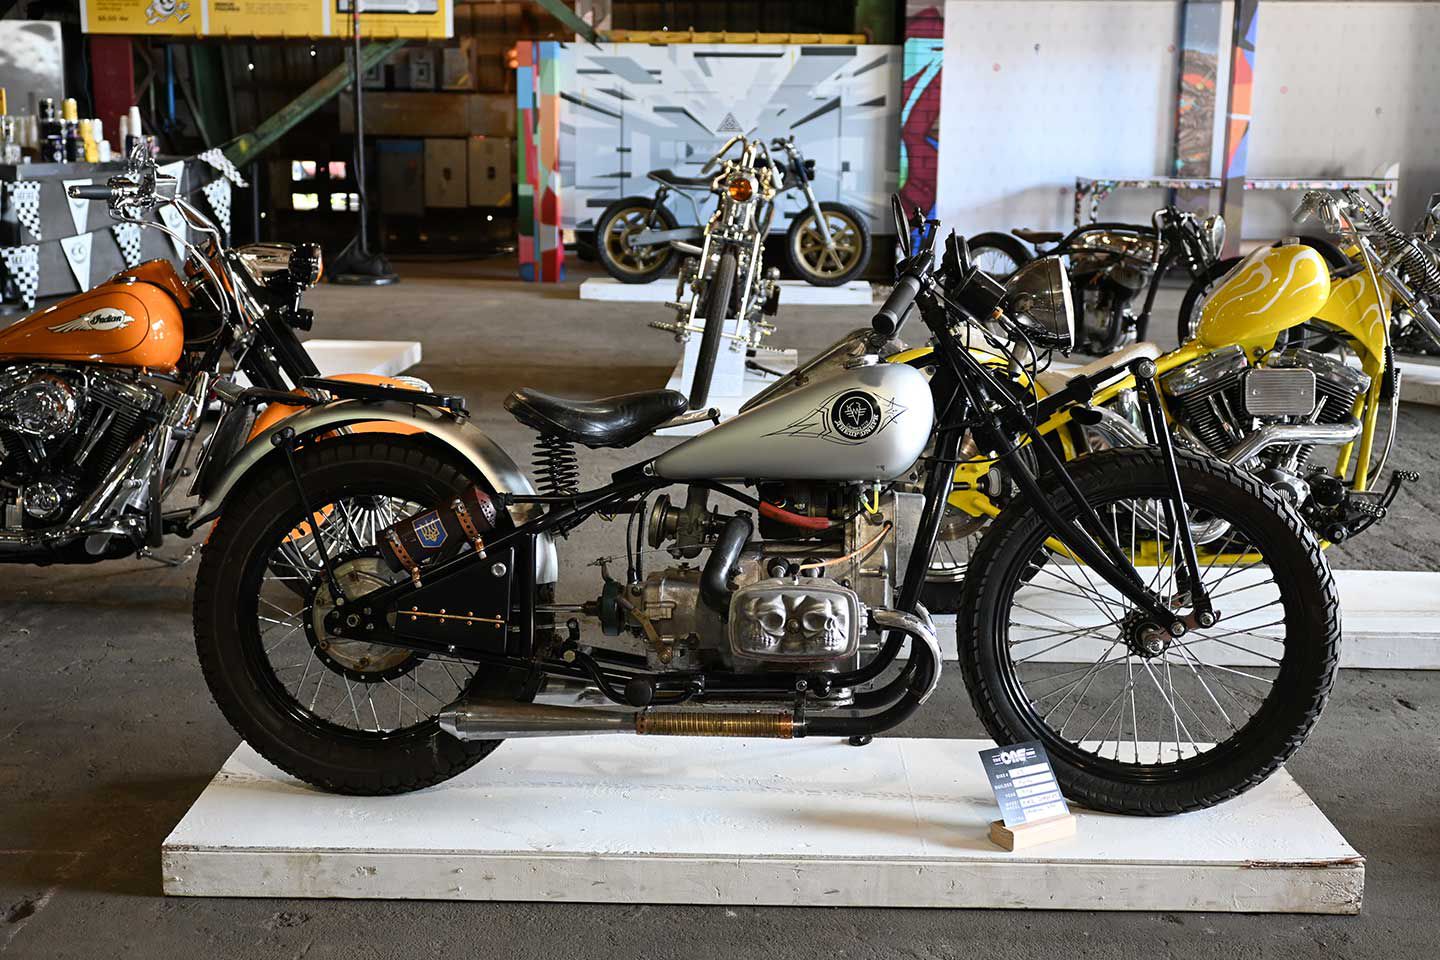 One of our show favorites was this rigid frame custom with an Indian springer fork and Indian Four tanks, powered by a Ukrainian Dnepr 650 engine and customized by Morto Olson.